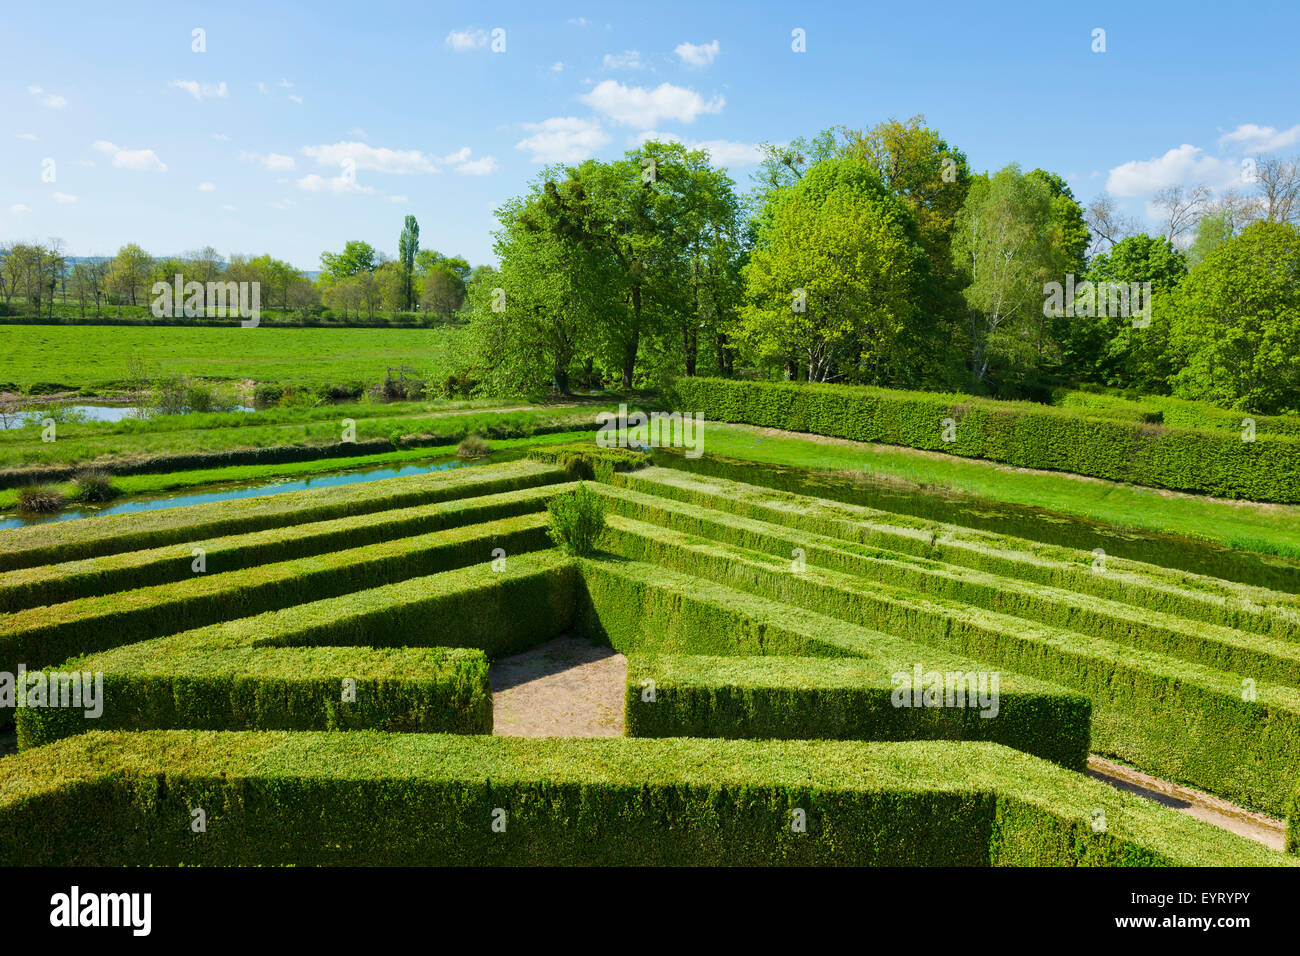 Chateau Cormatin, castle grounds with labyrinth, France Stock Photo